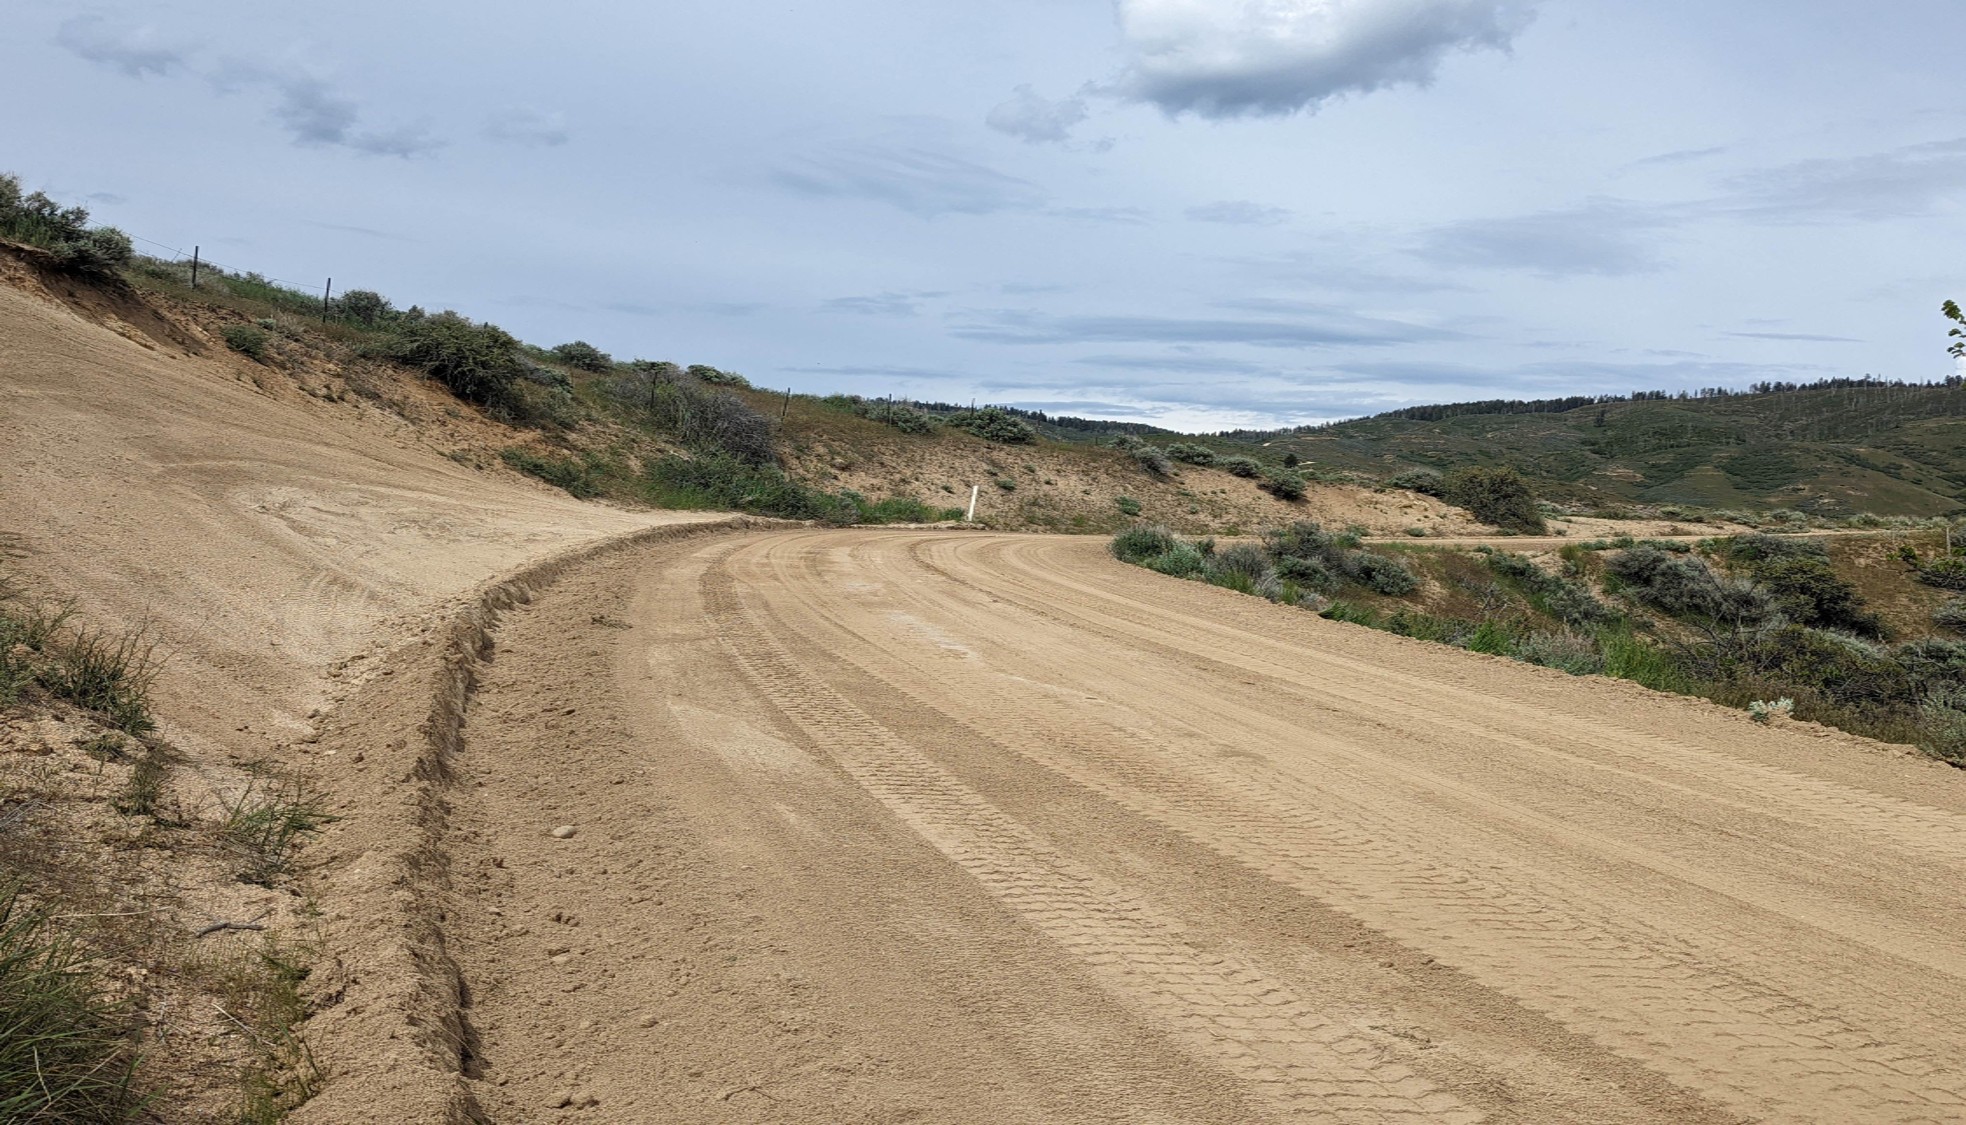 Dirt road cleared of surface hazards winds through dry, hilly landscape.